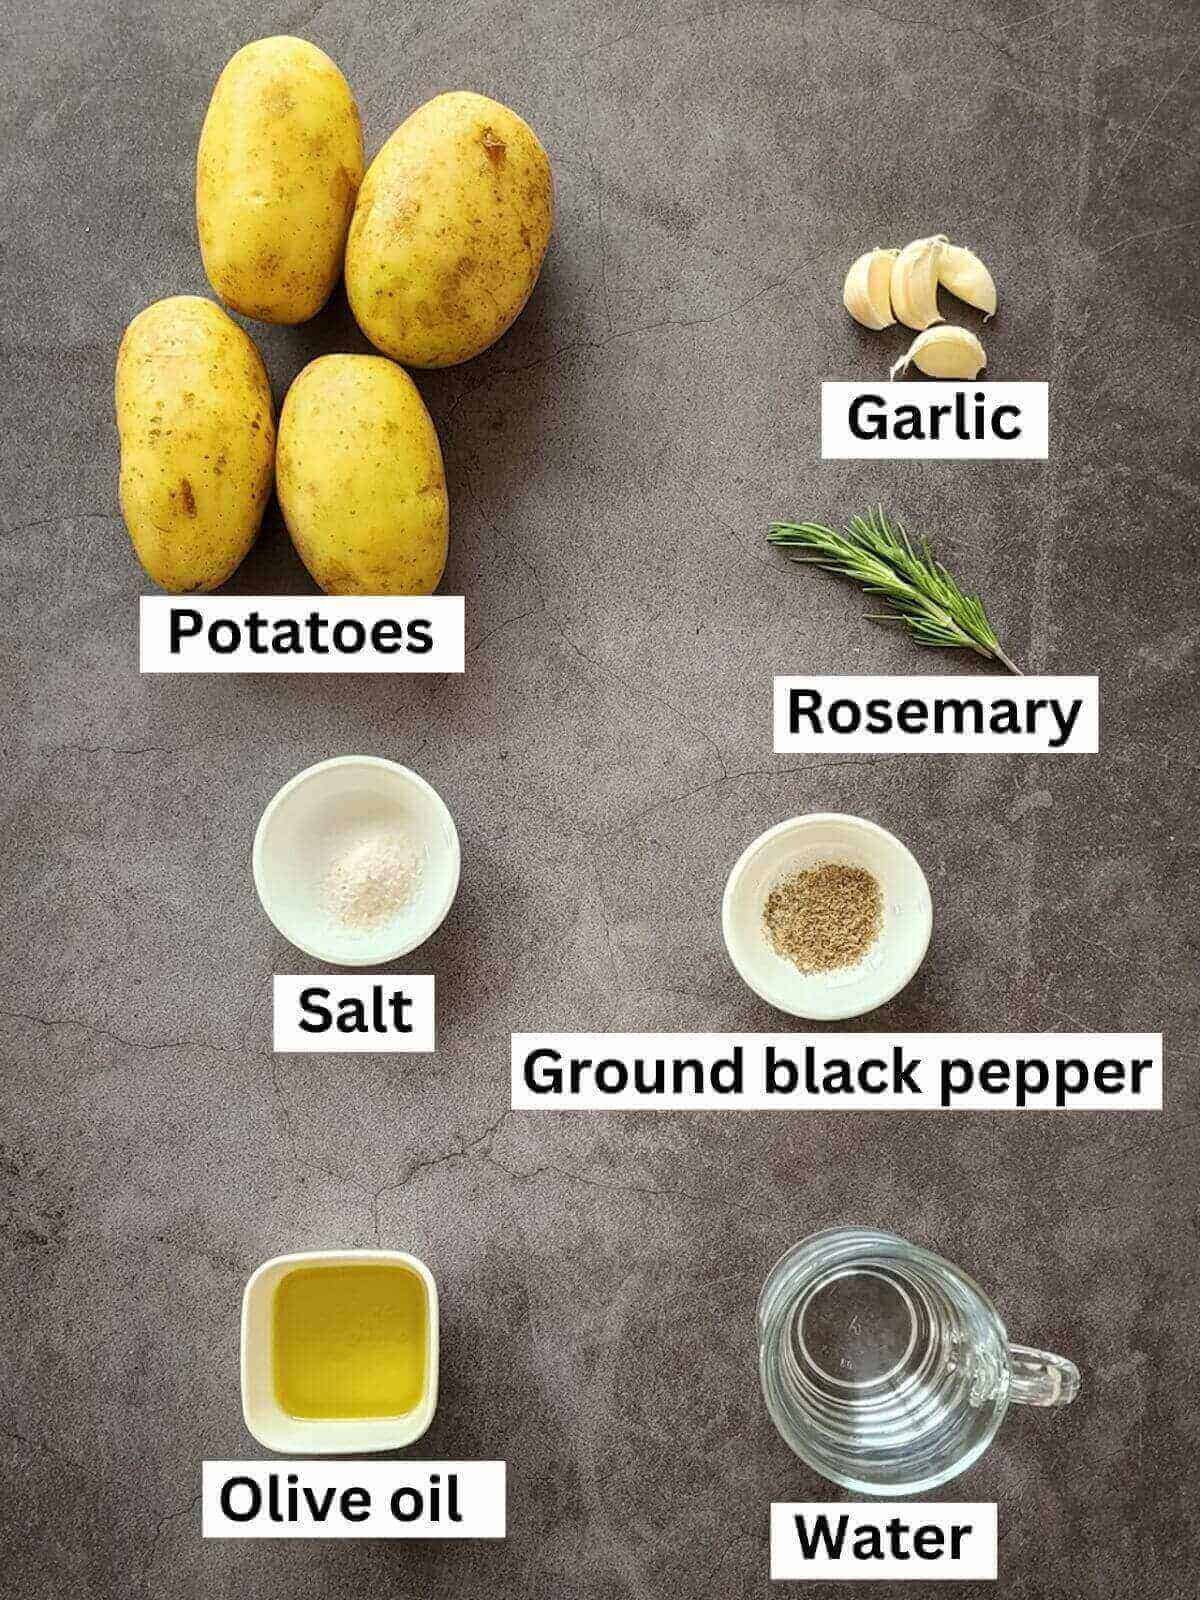 Ingredients required for pan fried potatoes recipe, labeled.